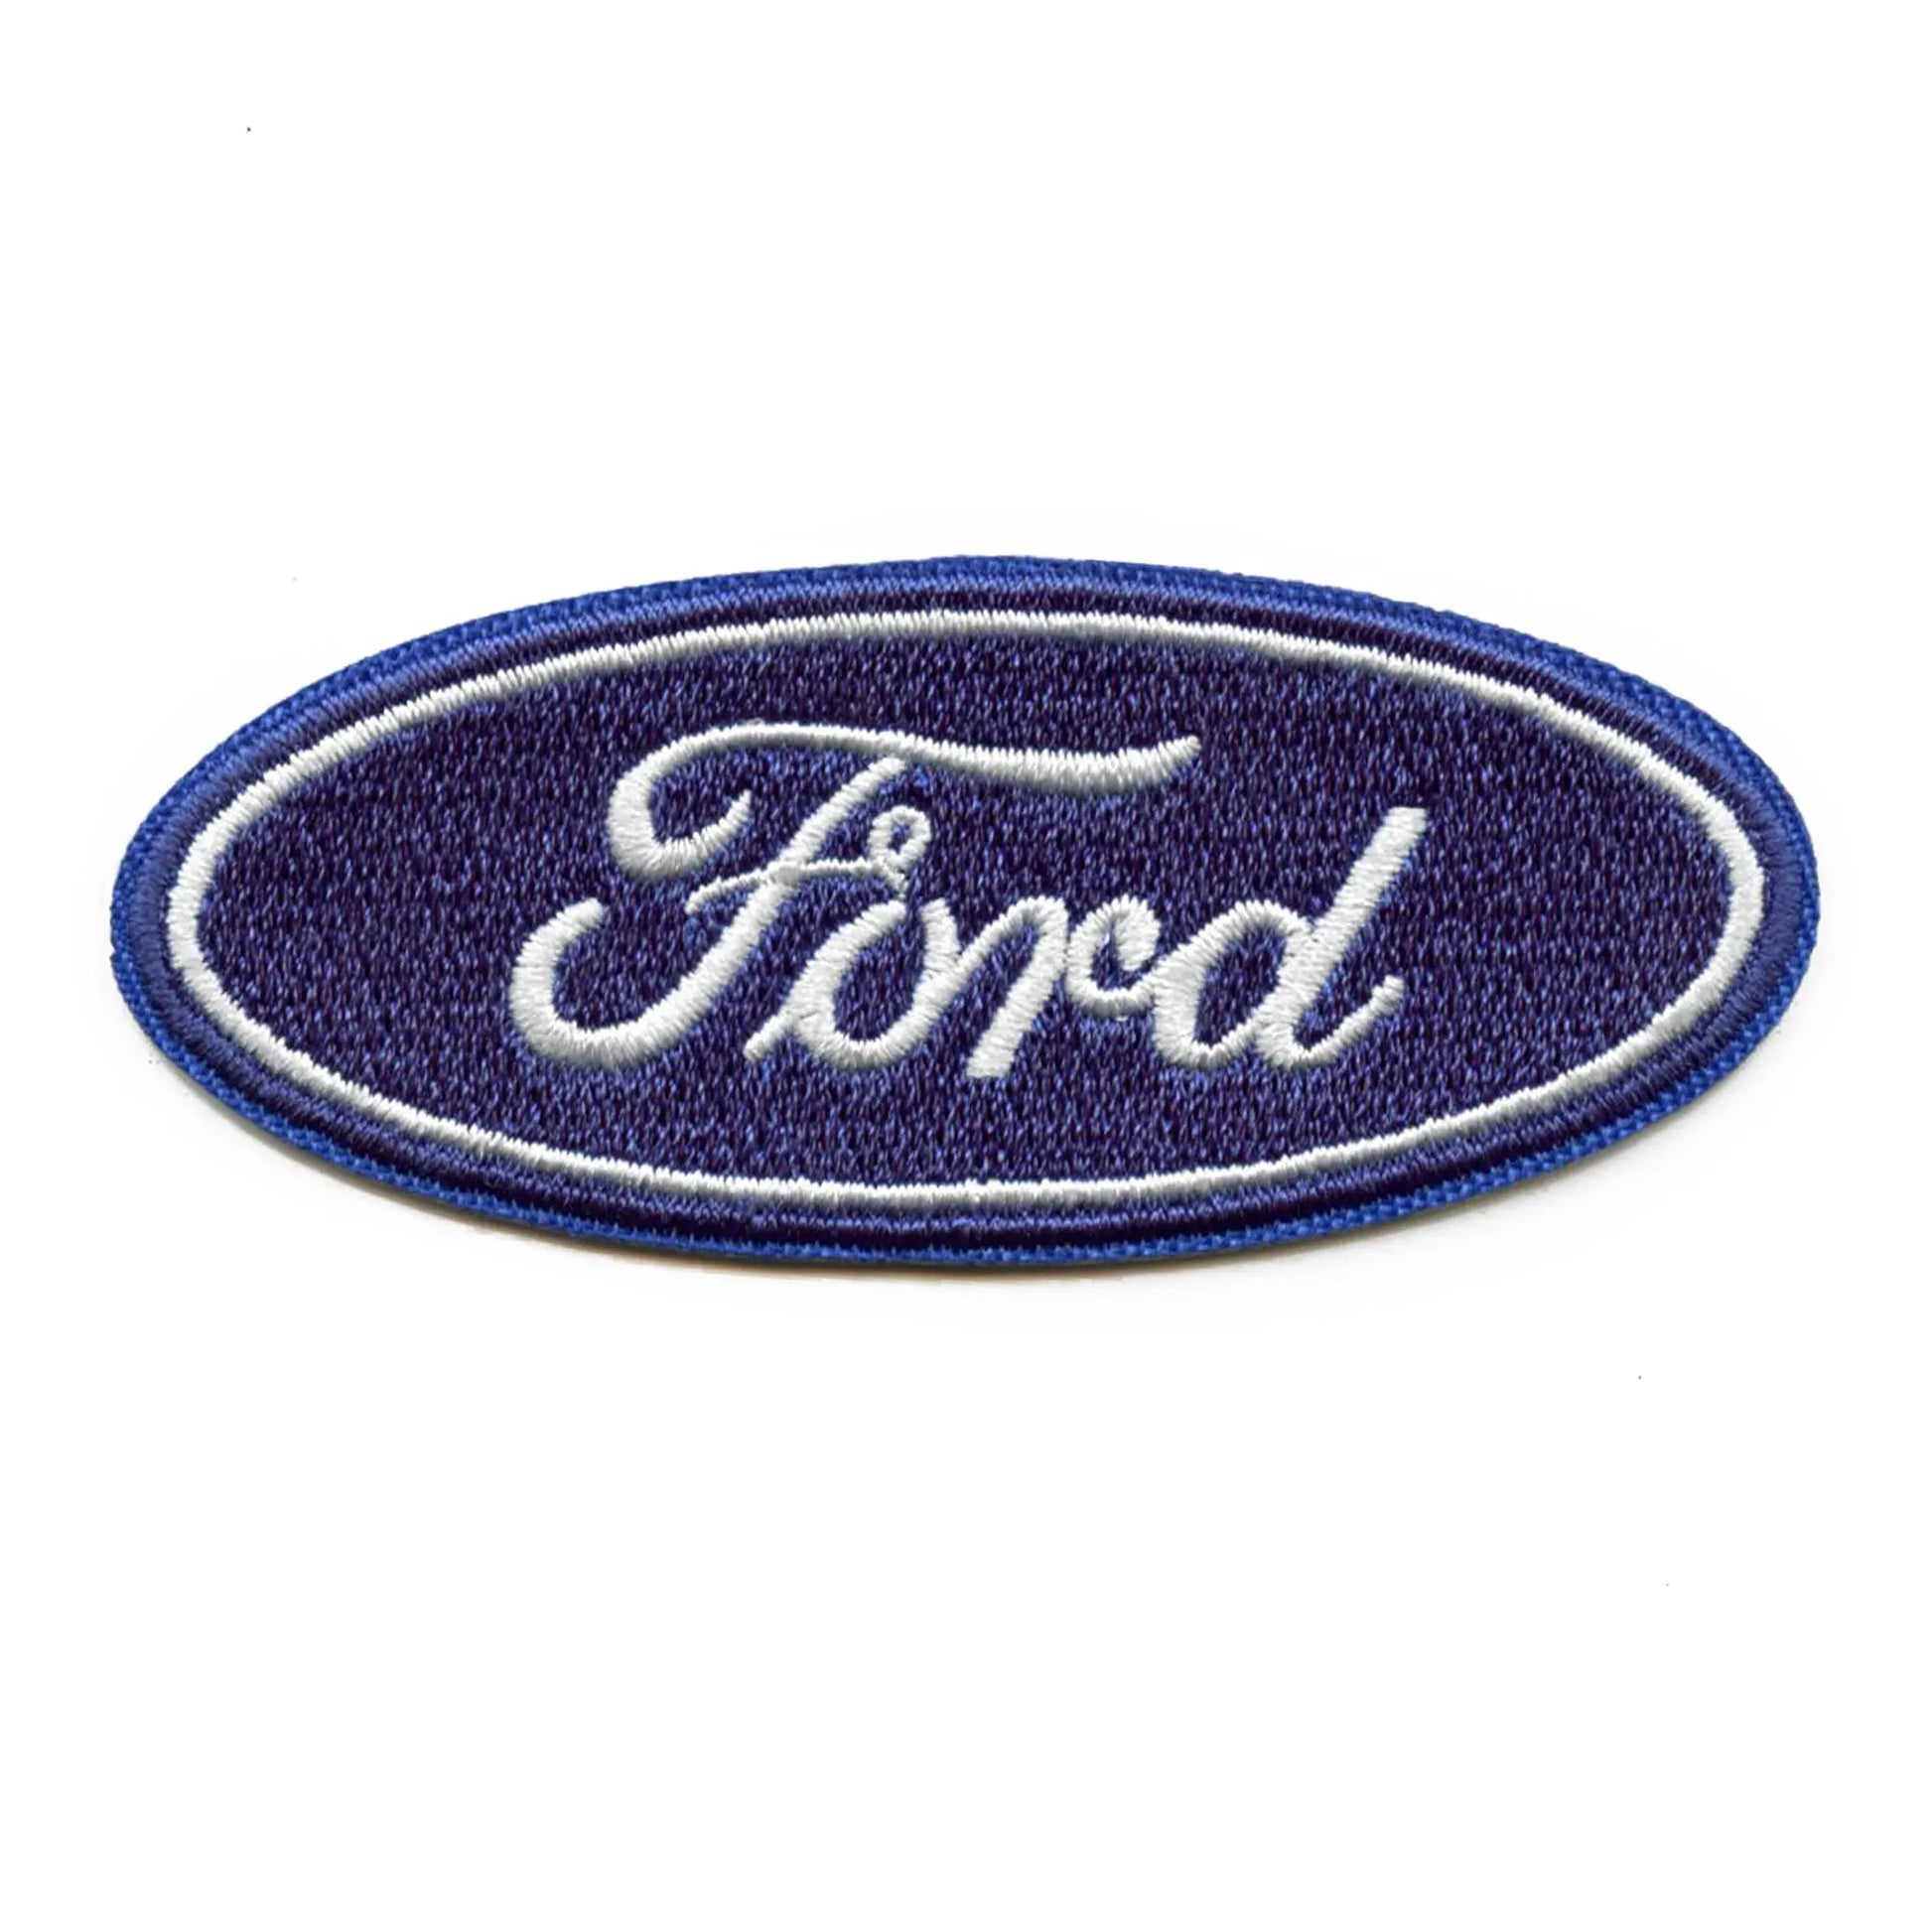 Ford Motor Company Logo Patch American Automotive Embroidered Iron On